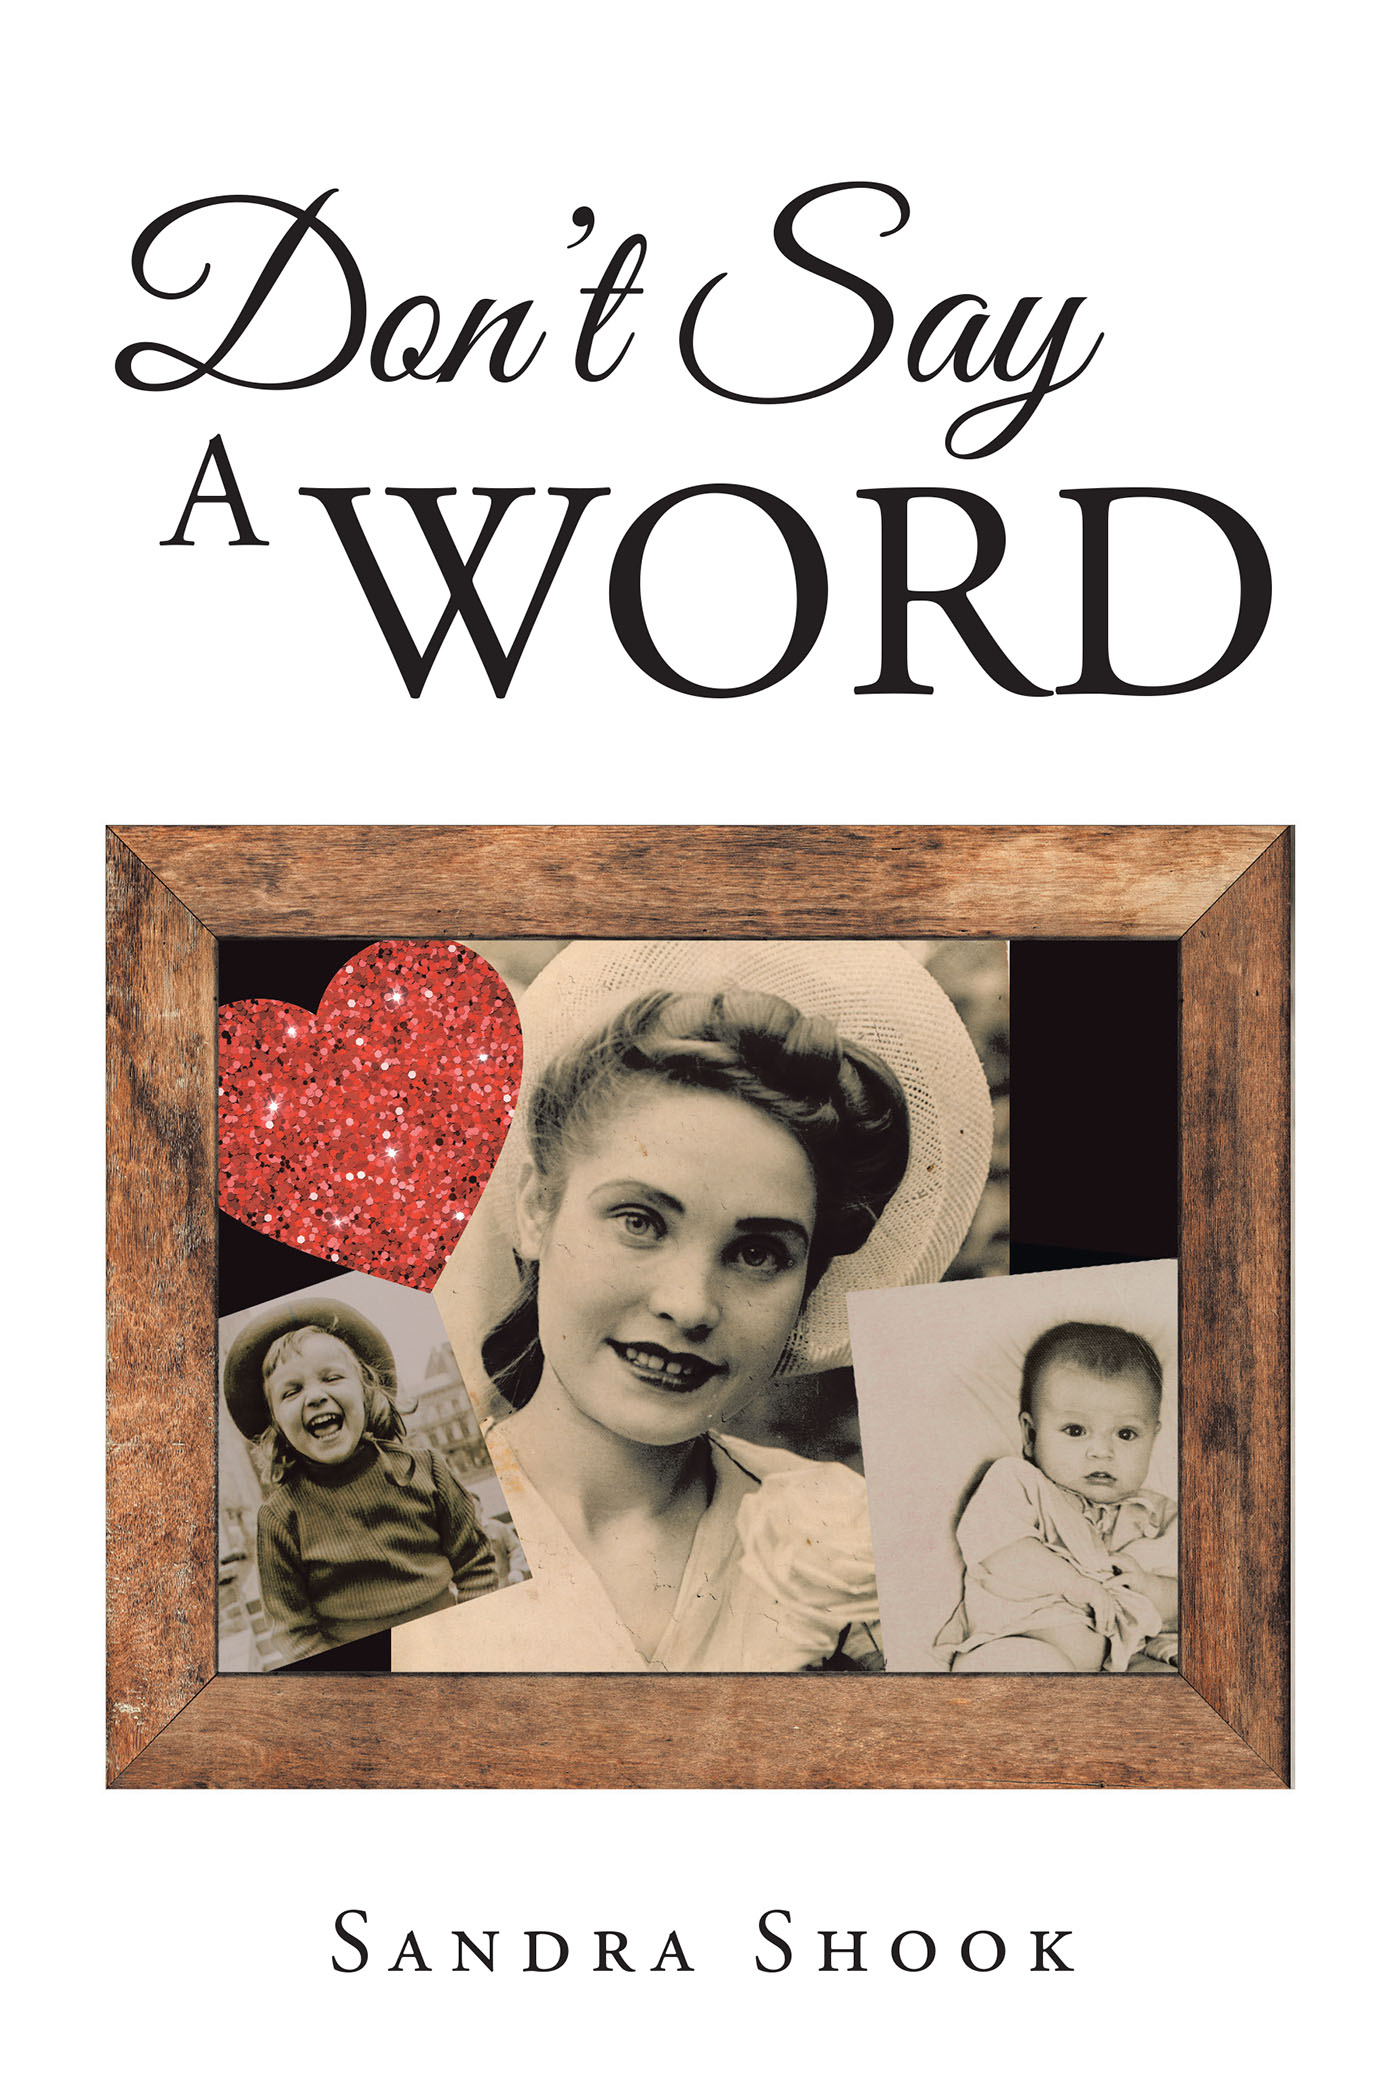 Sandra Shook’s Newly Released "Don’t Say a Word" is a Heart-Stopping Tale of Survival and Determination